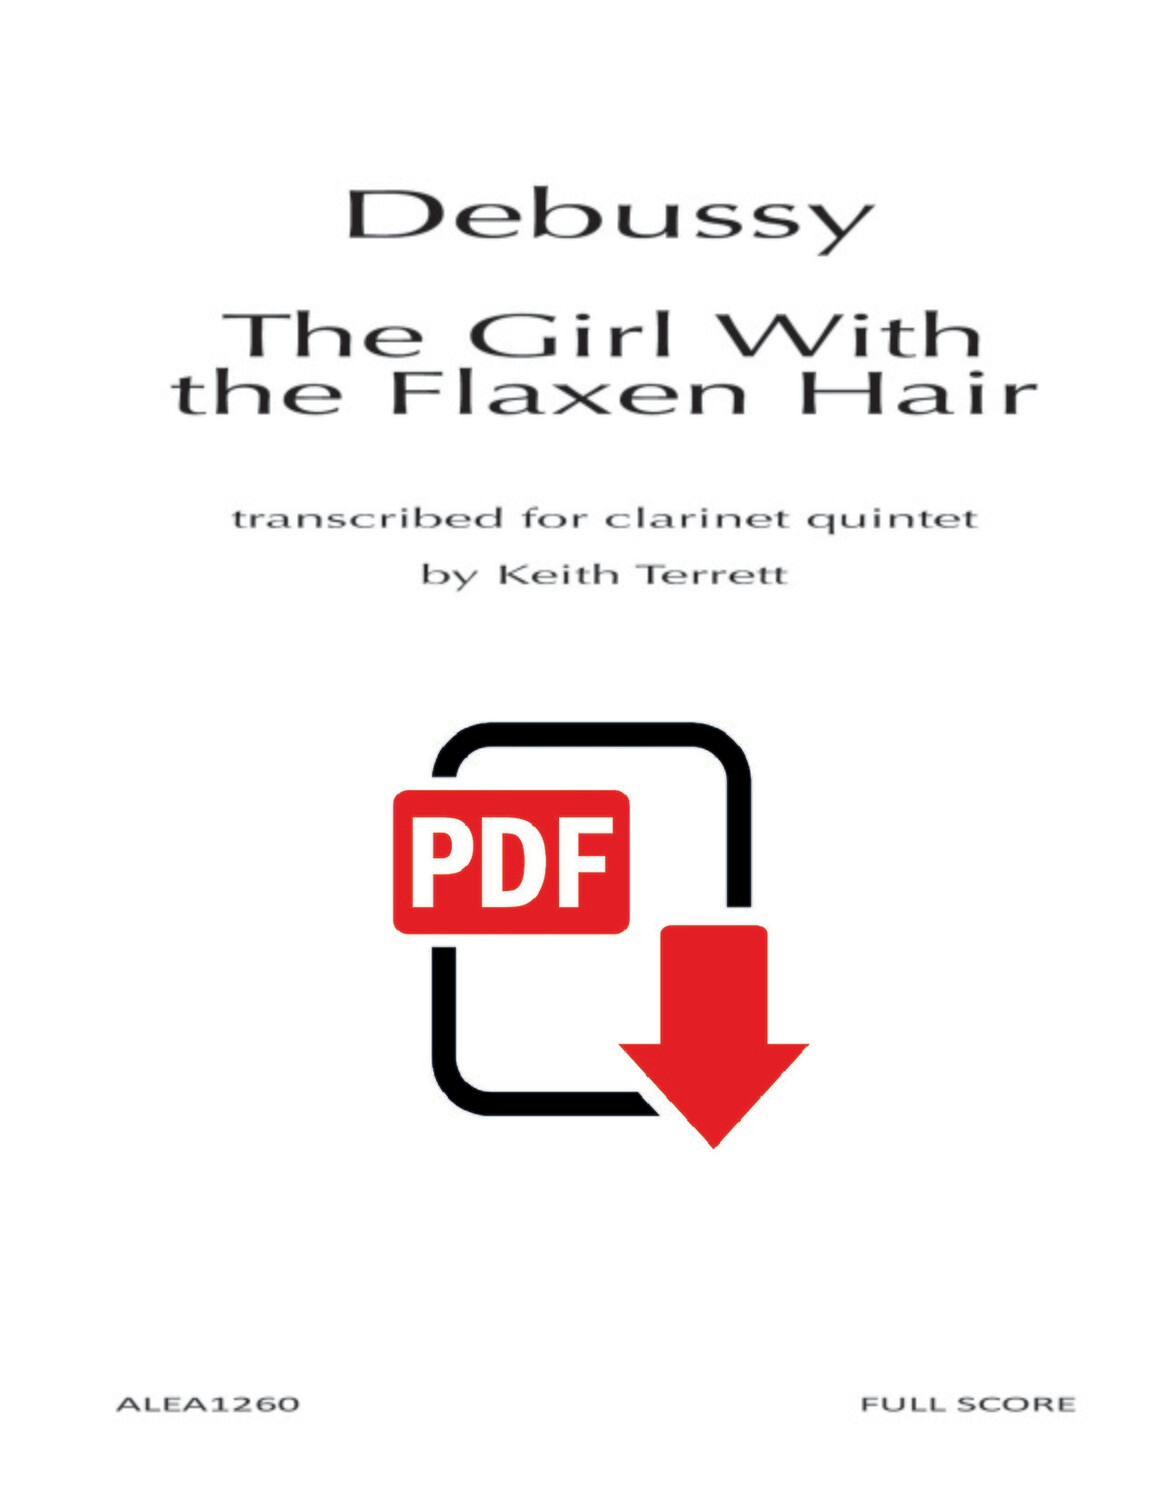 Debussy: The Girl With the Flaxen Hair (Hard Copy)